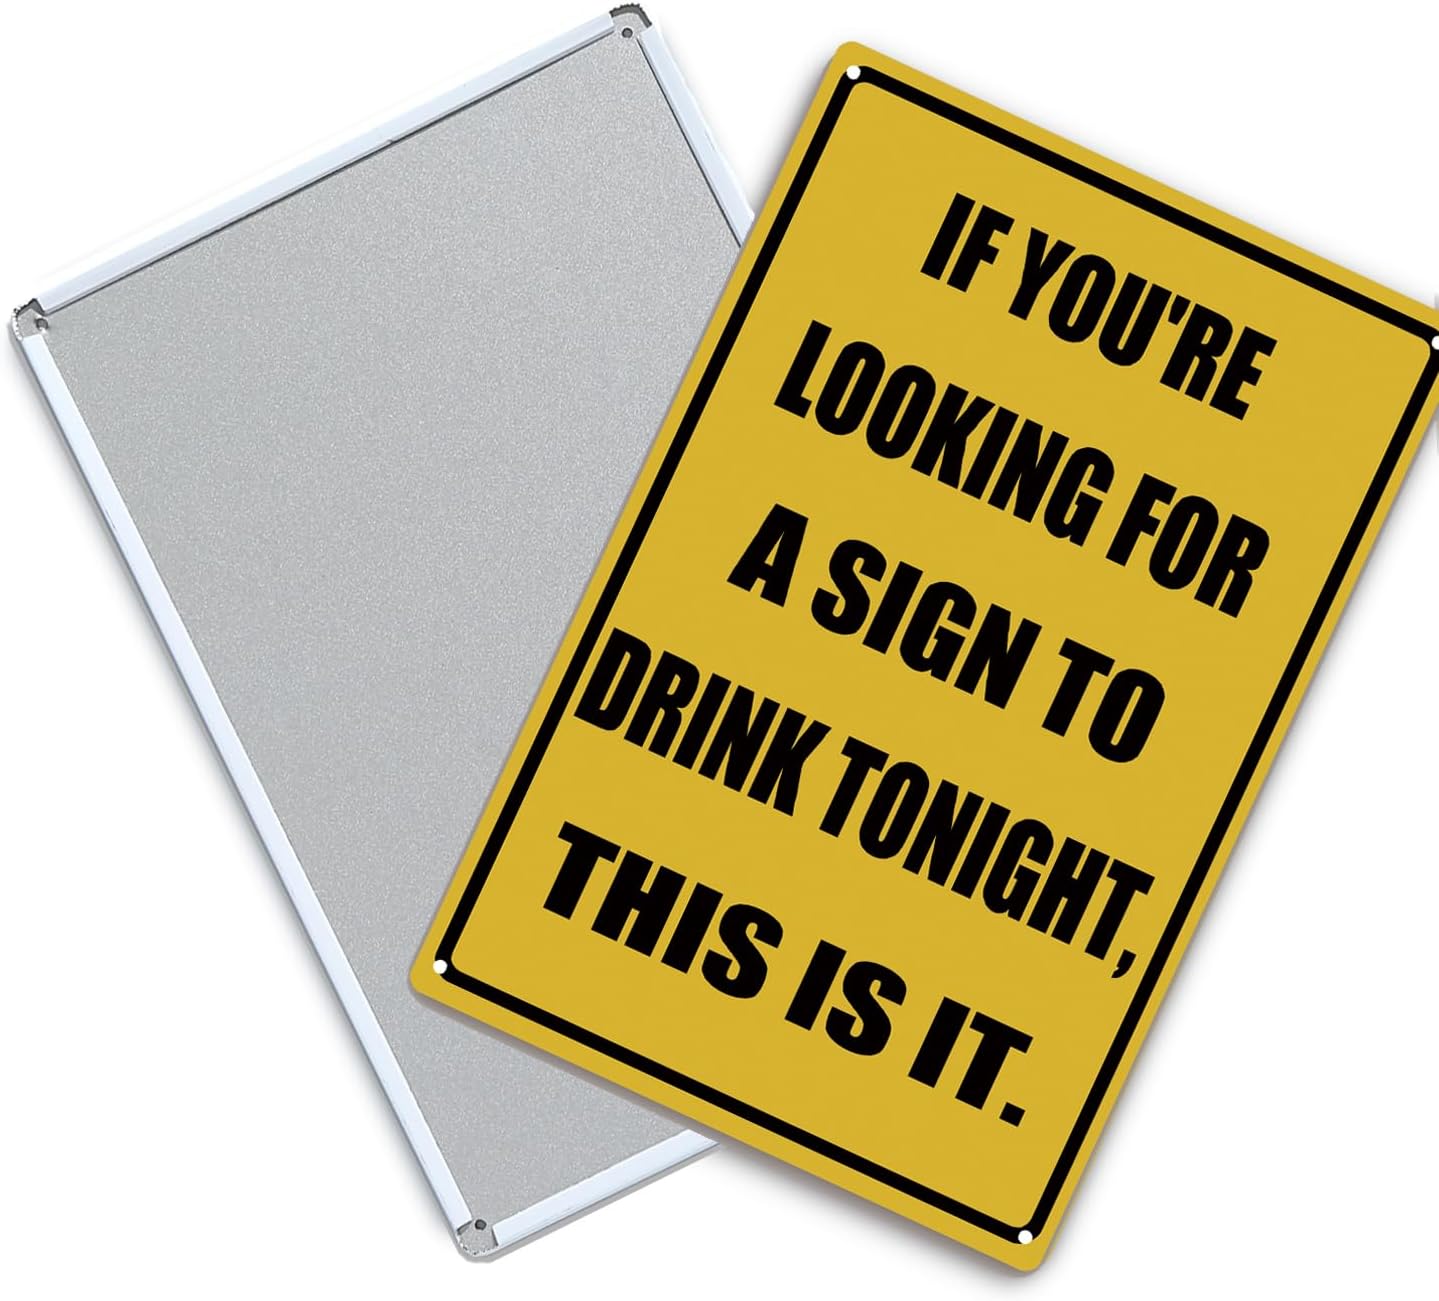 Funny Metal Sign to Drink Tonight 8" X 12" Tin Signs Man Cave Home Bar Decor Vintage Decorations Sign